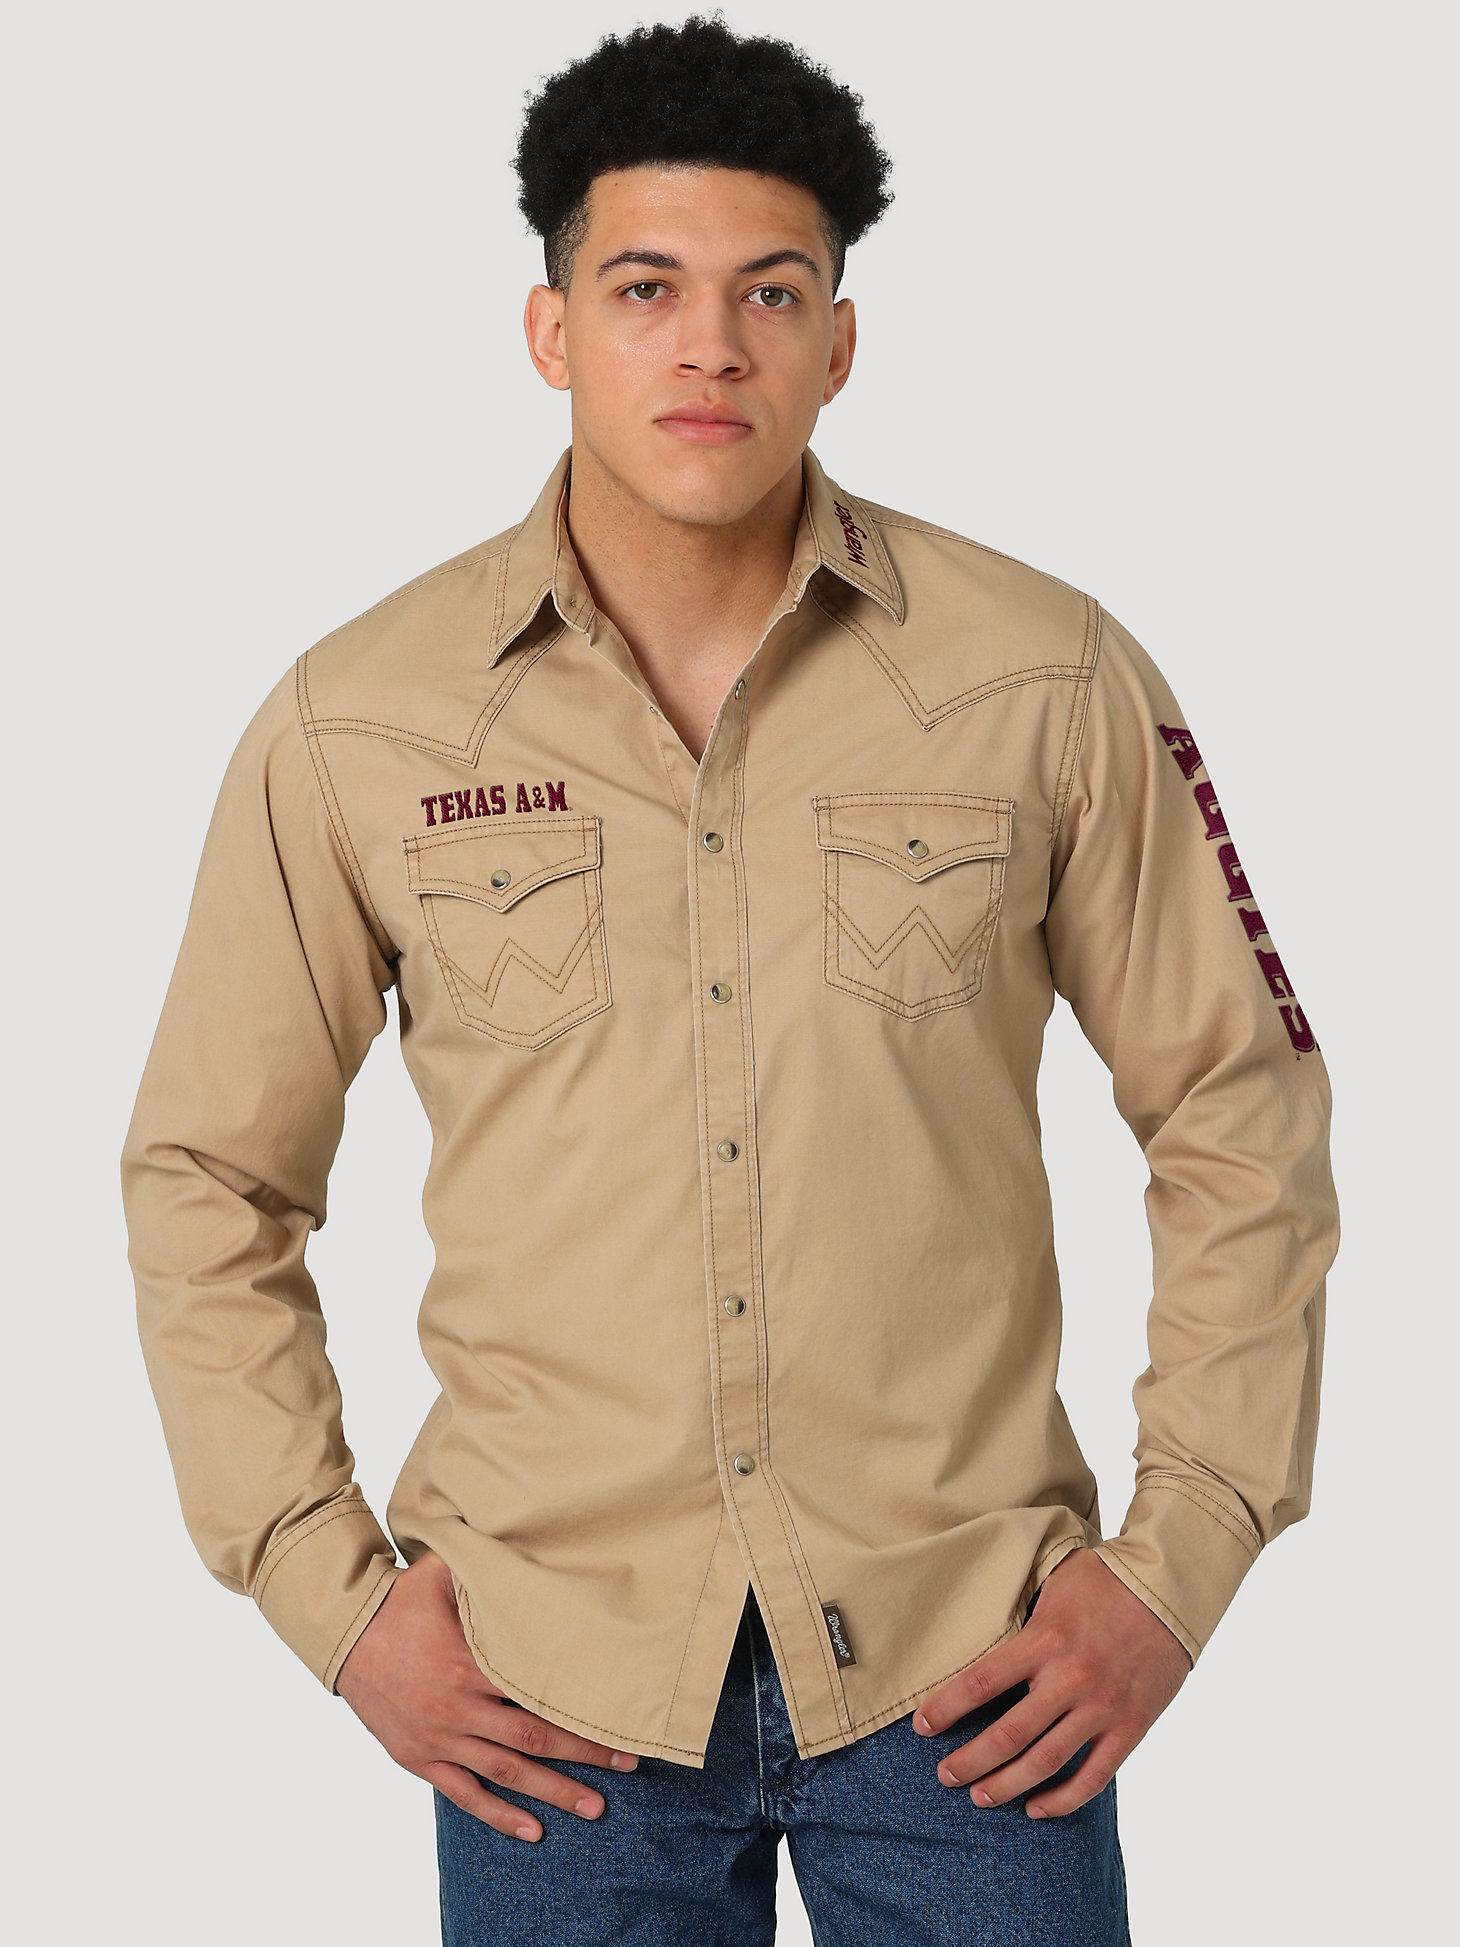 Wrangler Collegiate Embroidered Twill Western Snap Shirt in Texas A&M main view